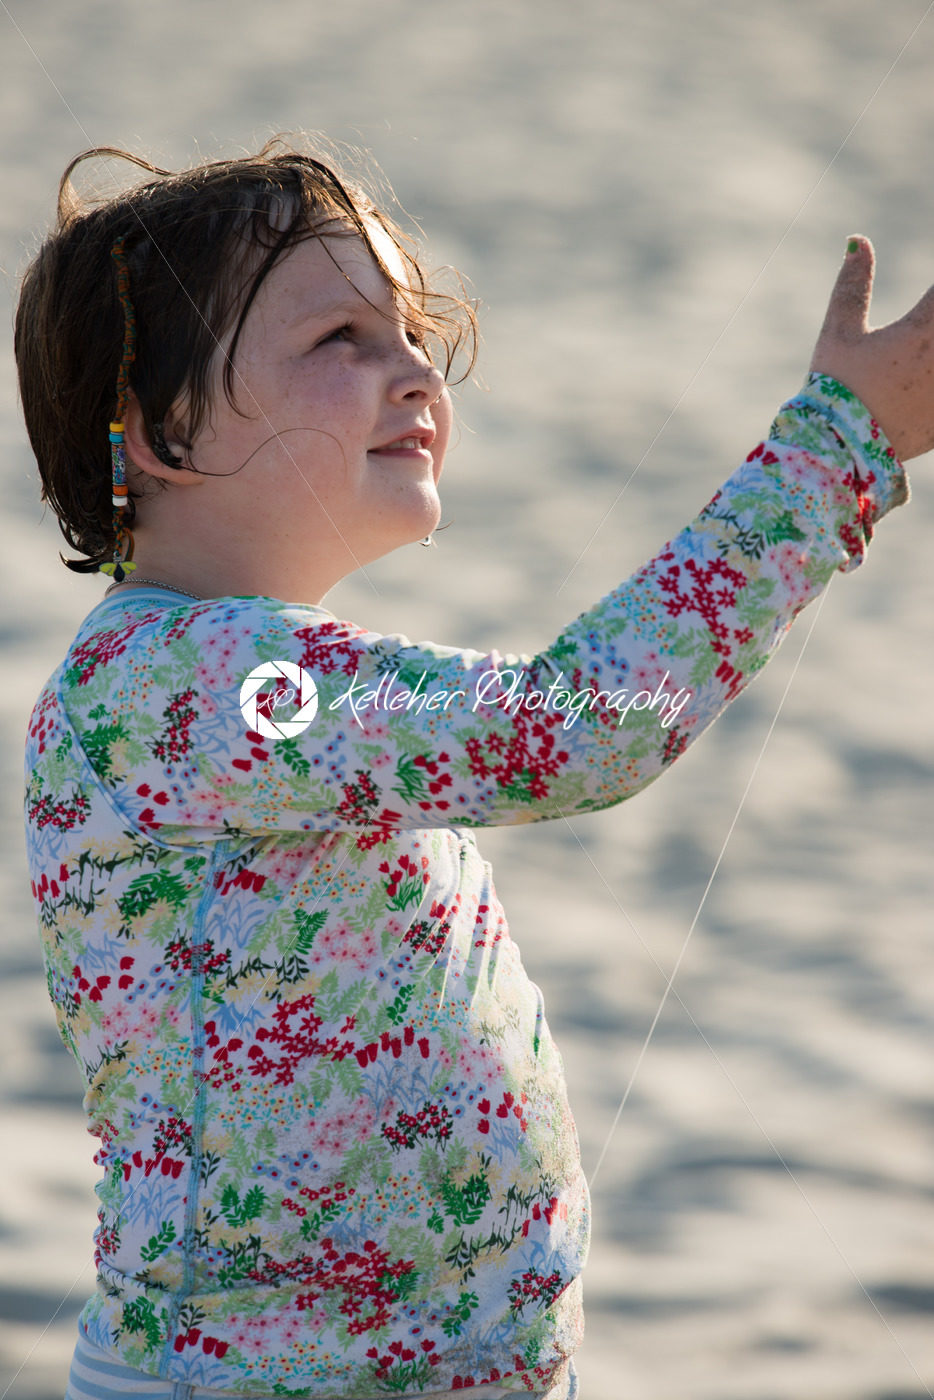 Young girl on beach with kite smiling - Kelleher Photography Store